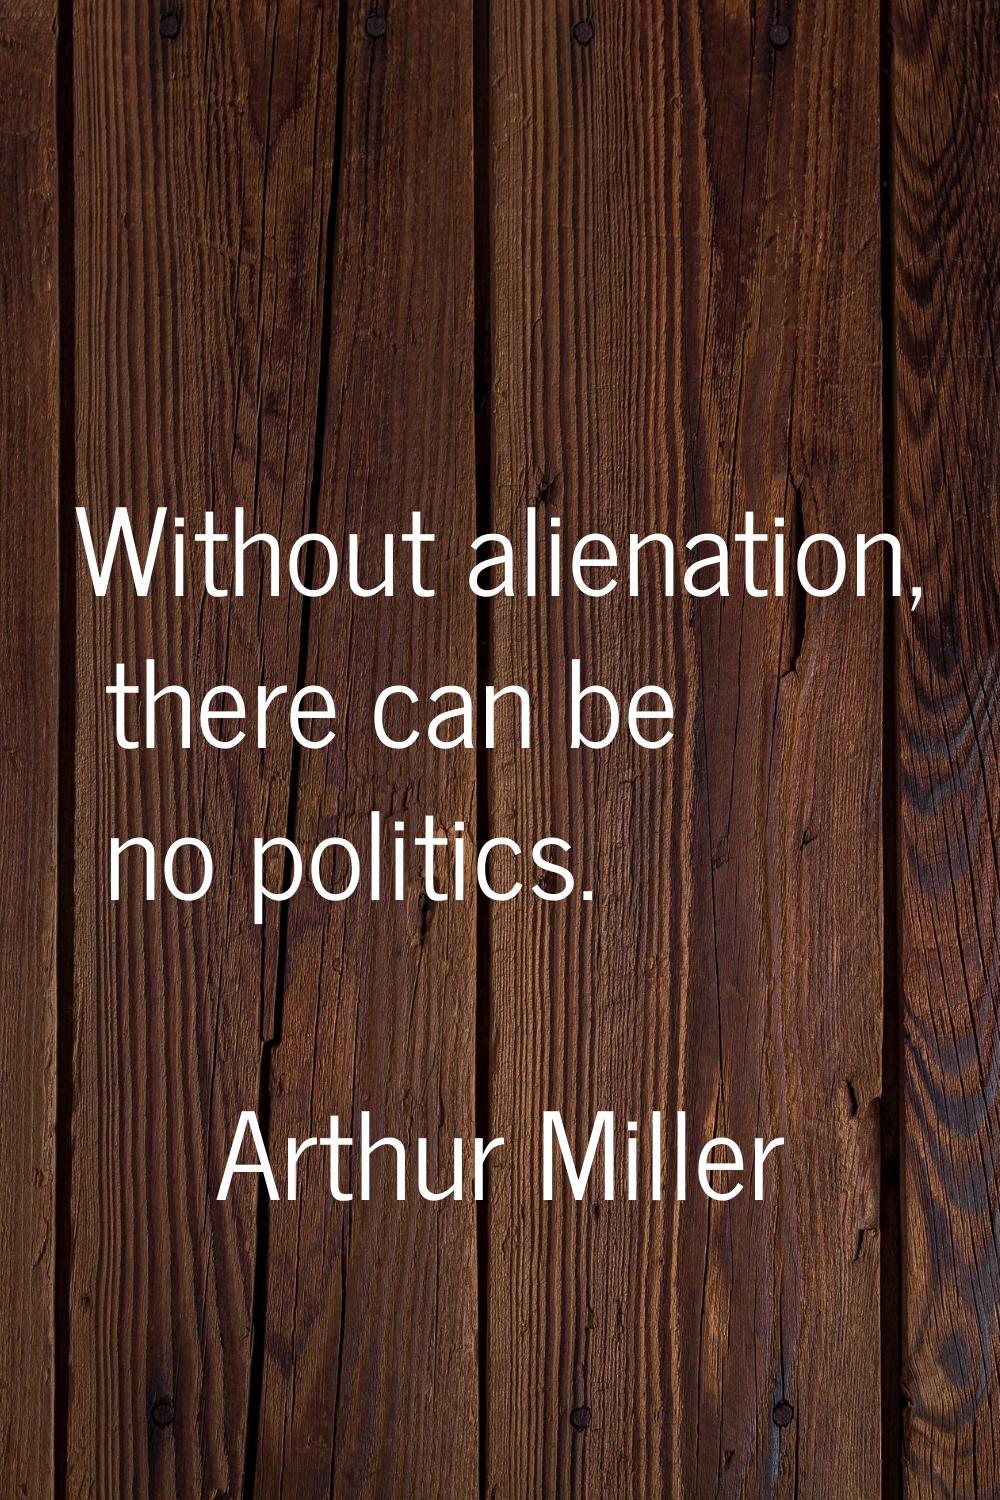 Without alienation, there can be no politics.